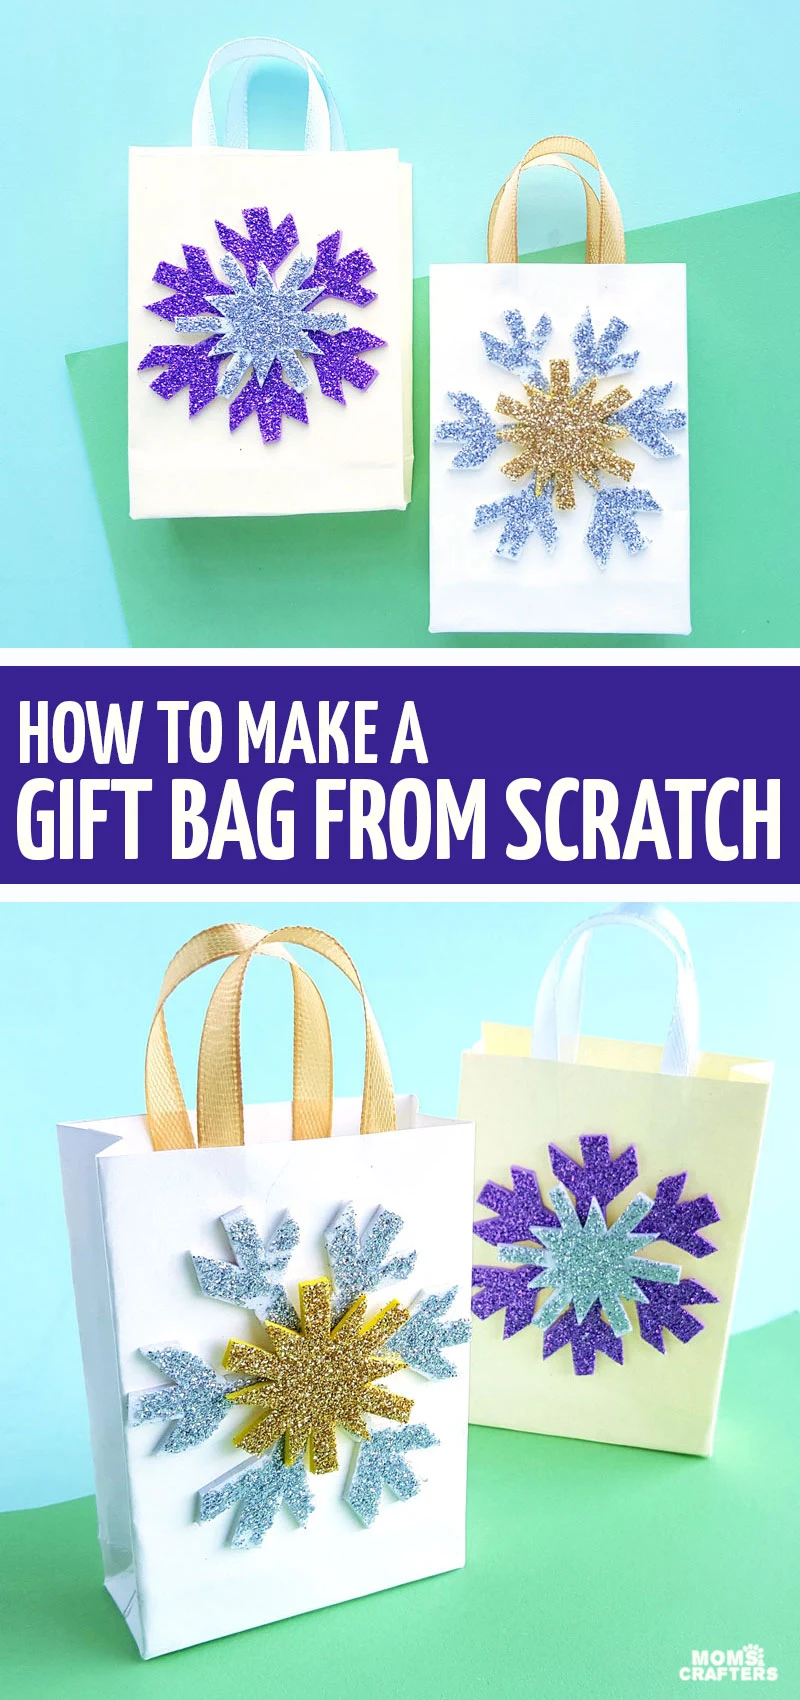 Click to learn how to make a gift bag out of wrapping paper from scratch and to learn how to create this DIY Frozen inspired snowflake gift bag!